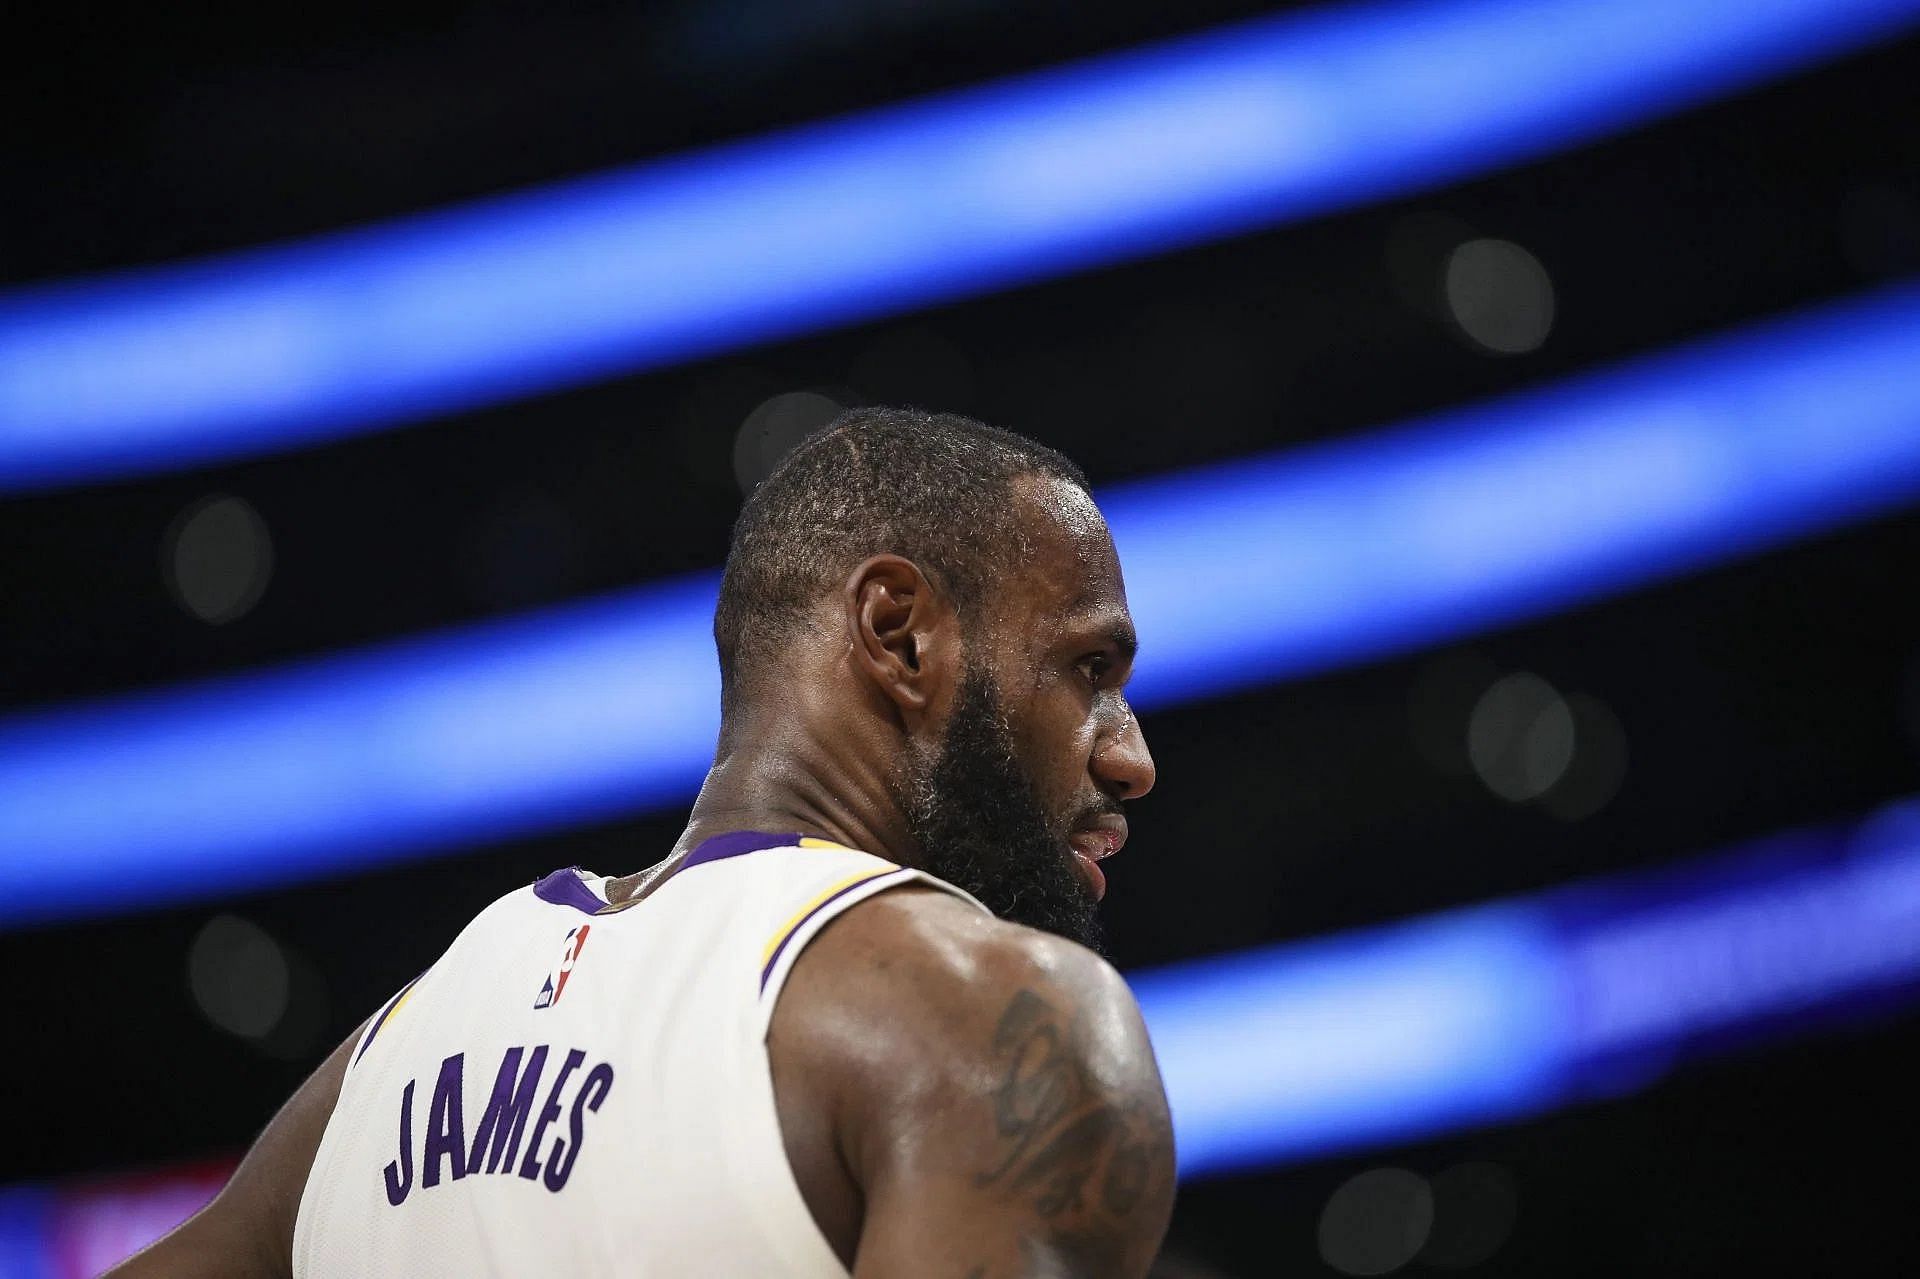 NBA superstar LeBron James condemns ongoing violence happening in Israel.